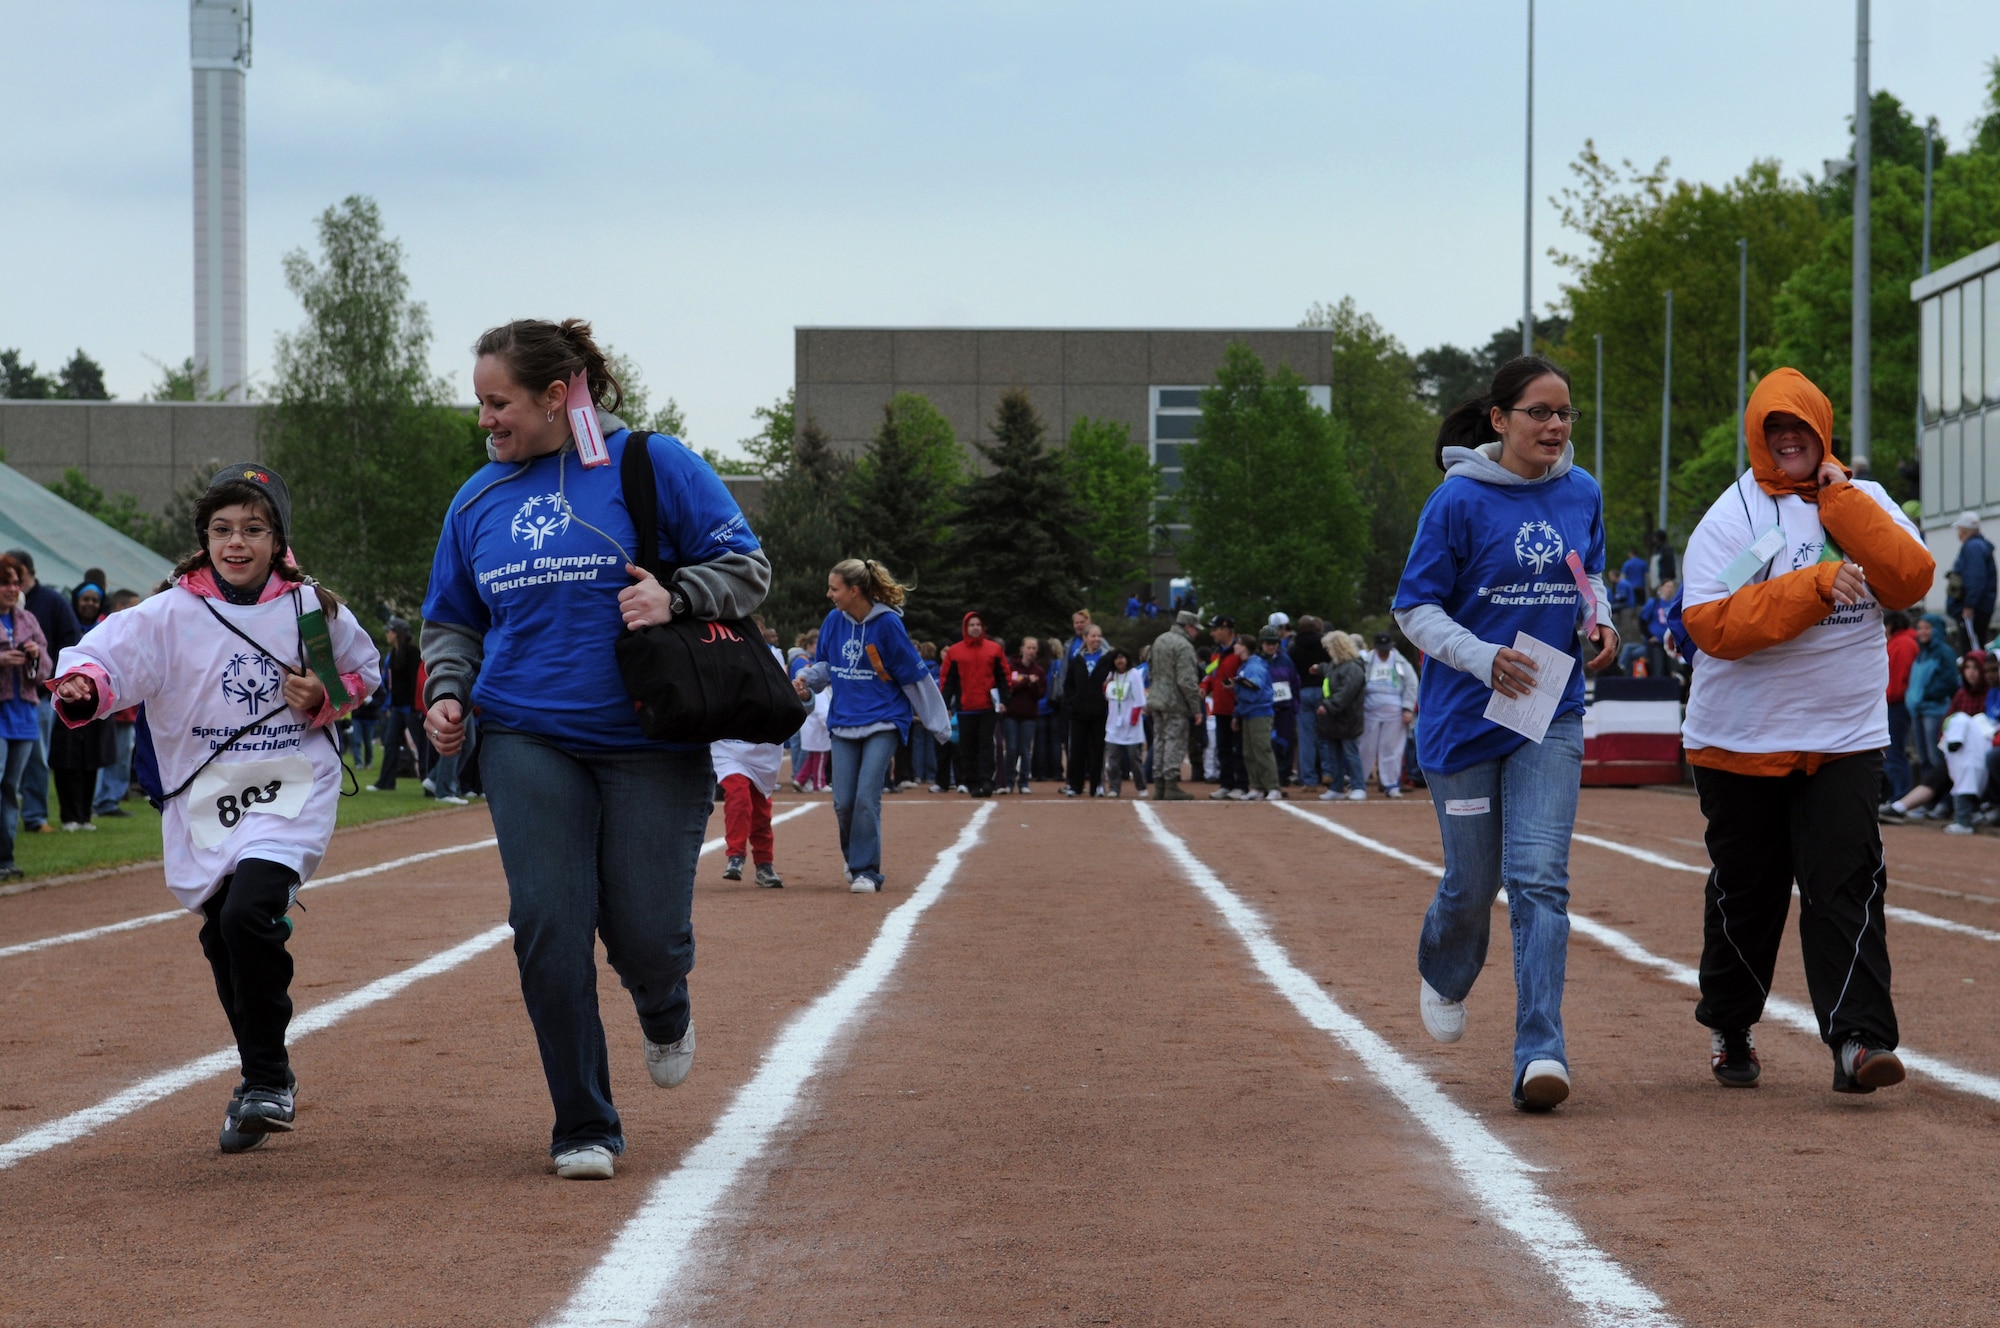 Athletes and their buddies run a race at the 36th Annual Special Olympics held in Enkenbach-Alsenborn, Germany, May 6, 2009. Special Olympics is an international program of year-round sports training and athletic competition for more than 1.7 million children and adults with disabilities in more than 150 countries including Germany. (U.S. Air Force photo by Airman 1st Class Grovert Fuentes-Contreras)(Released)